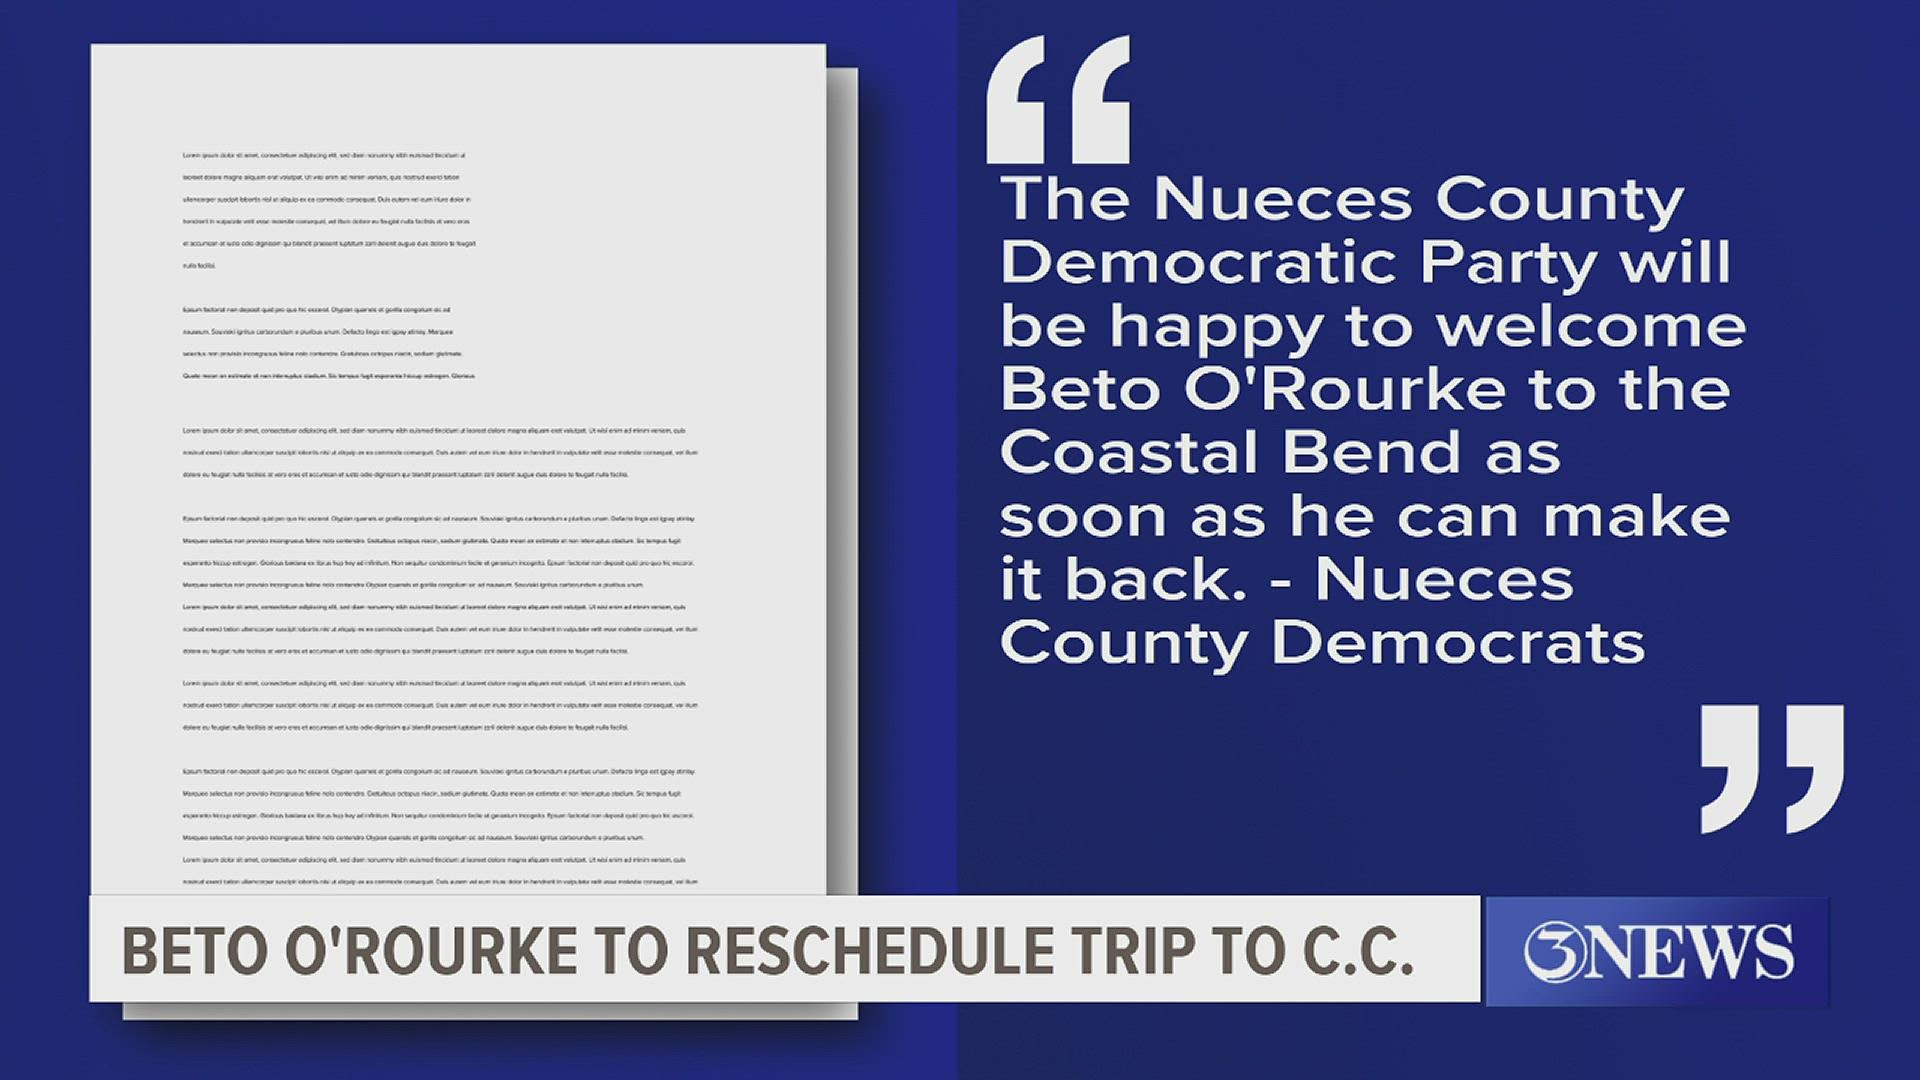 O'Rourke was scheduled to make a stop in Corpus Christi Saturday night but is instead resting at home, his campaign told 3NEWS.